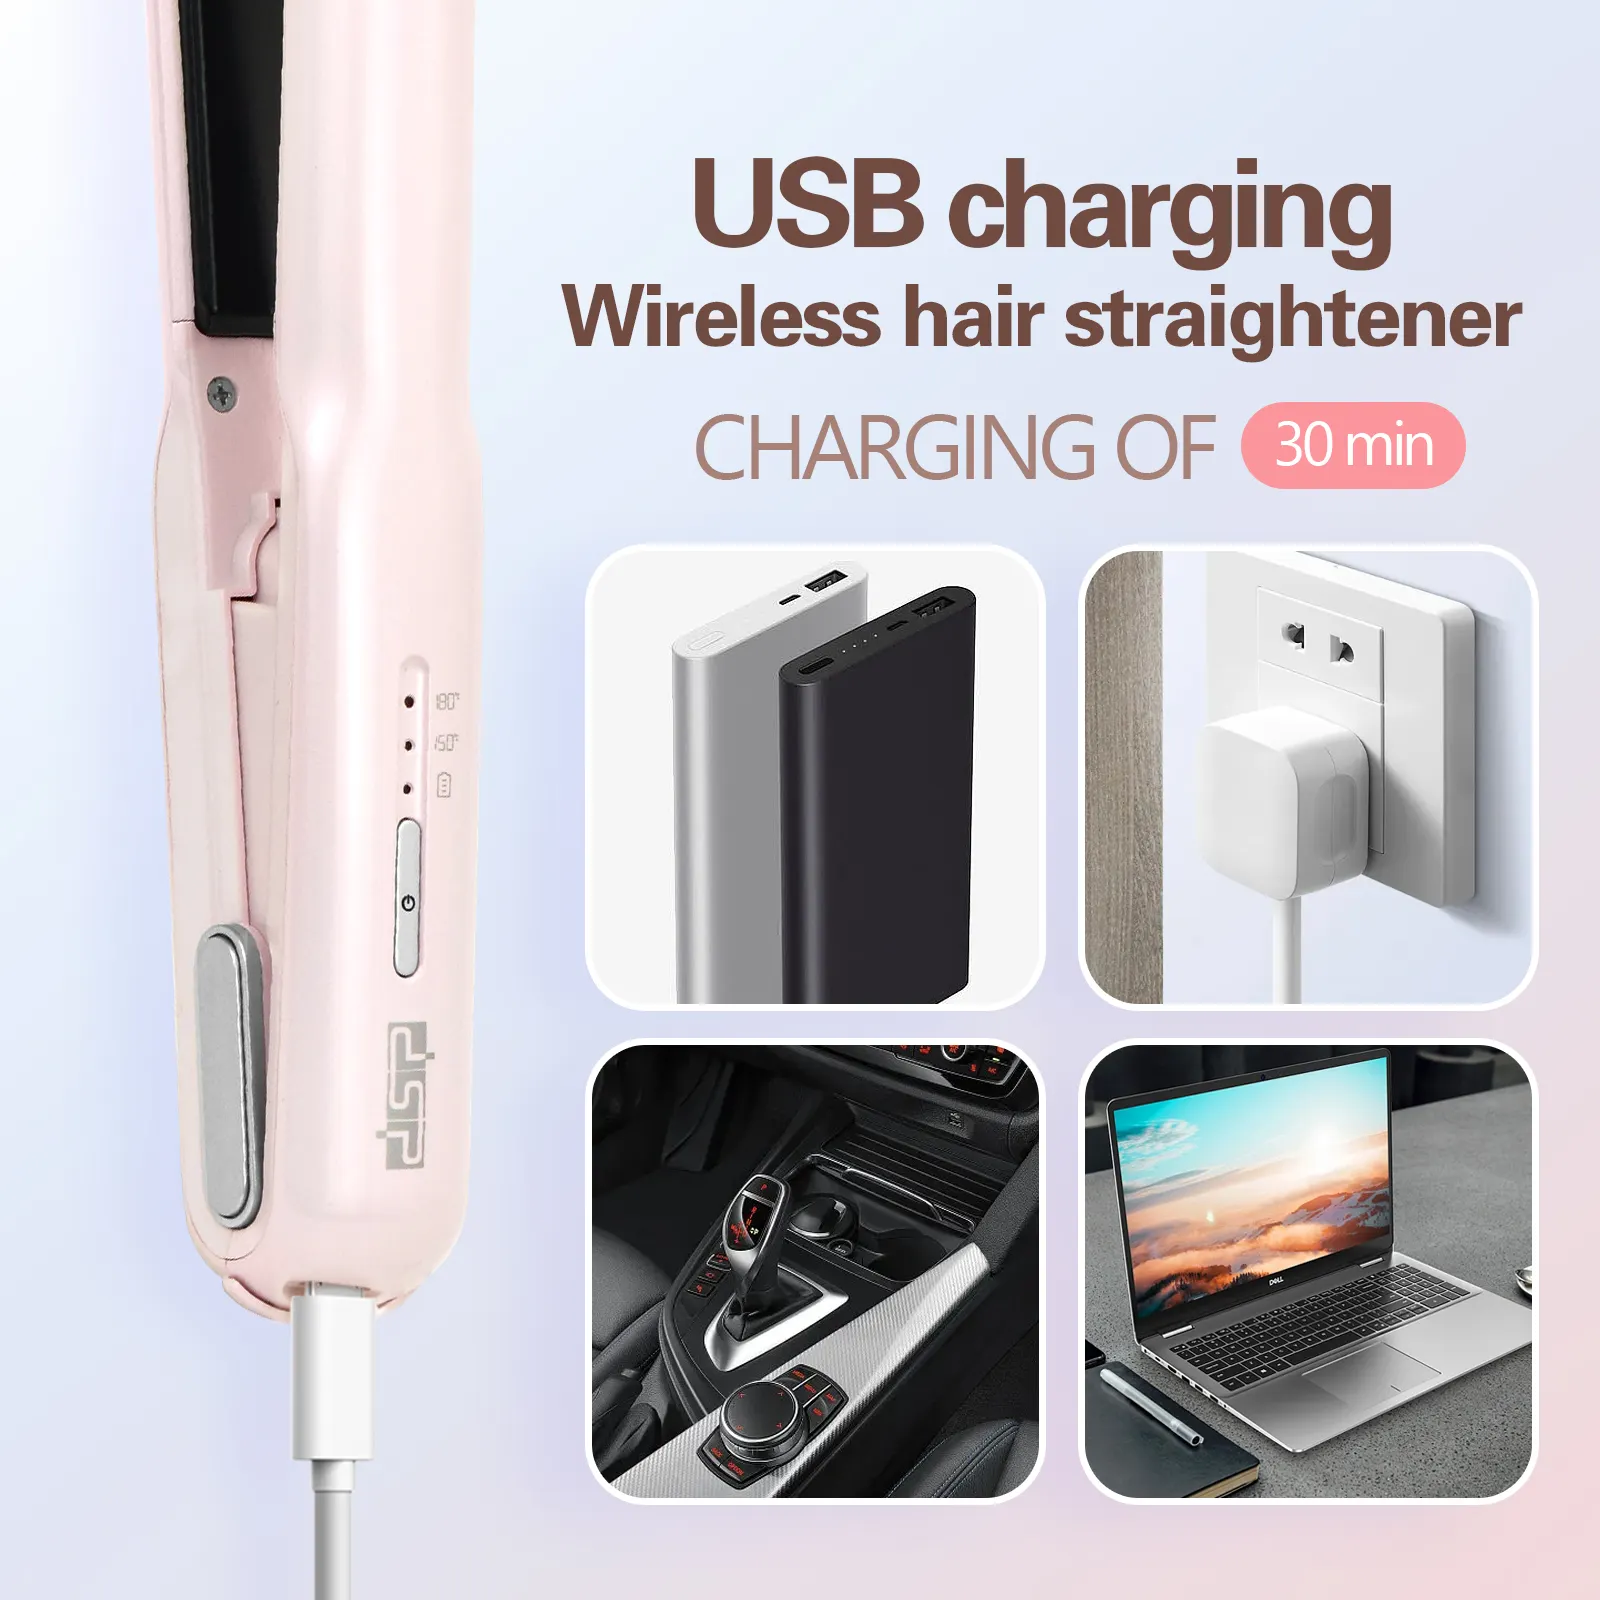 DSP Professional USB Rechargeable Cordless Portable Automatic Aluminum Flat Iron With LED Display Hair Straightener